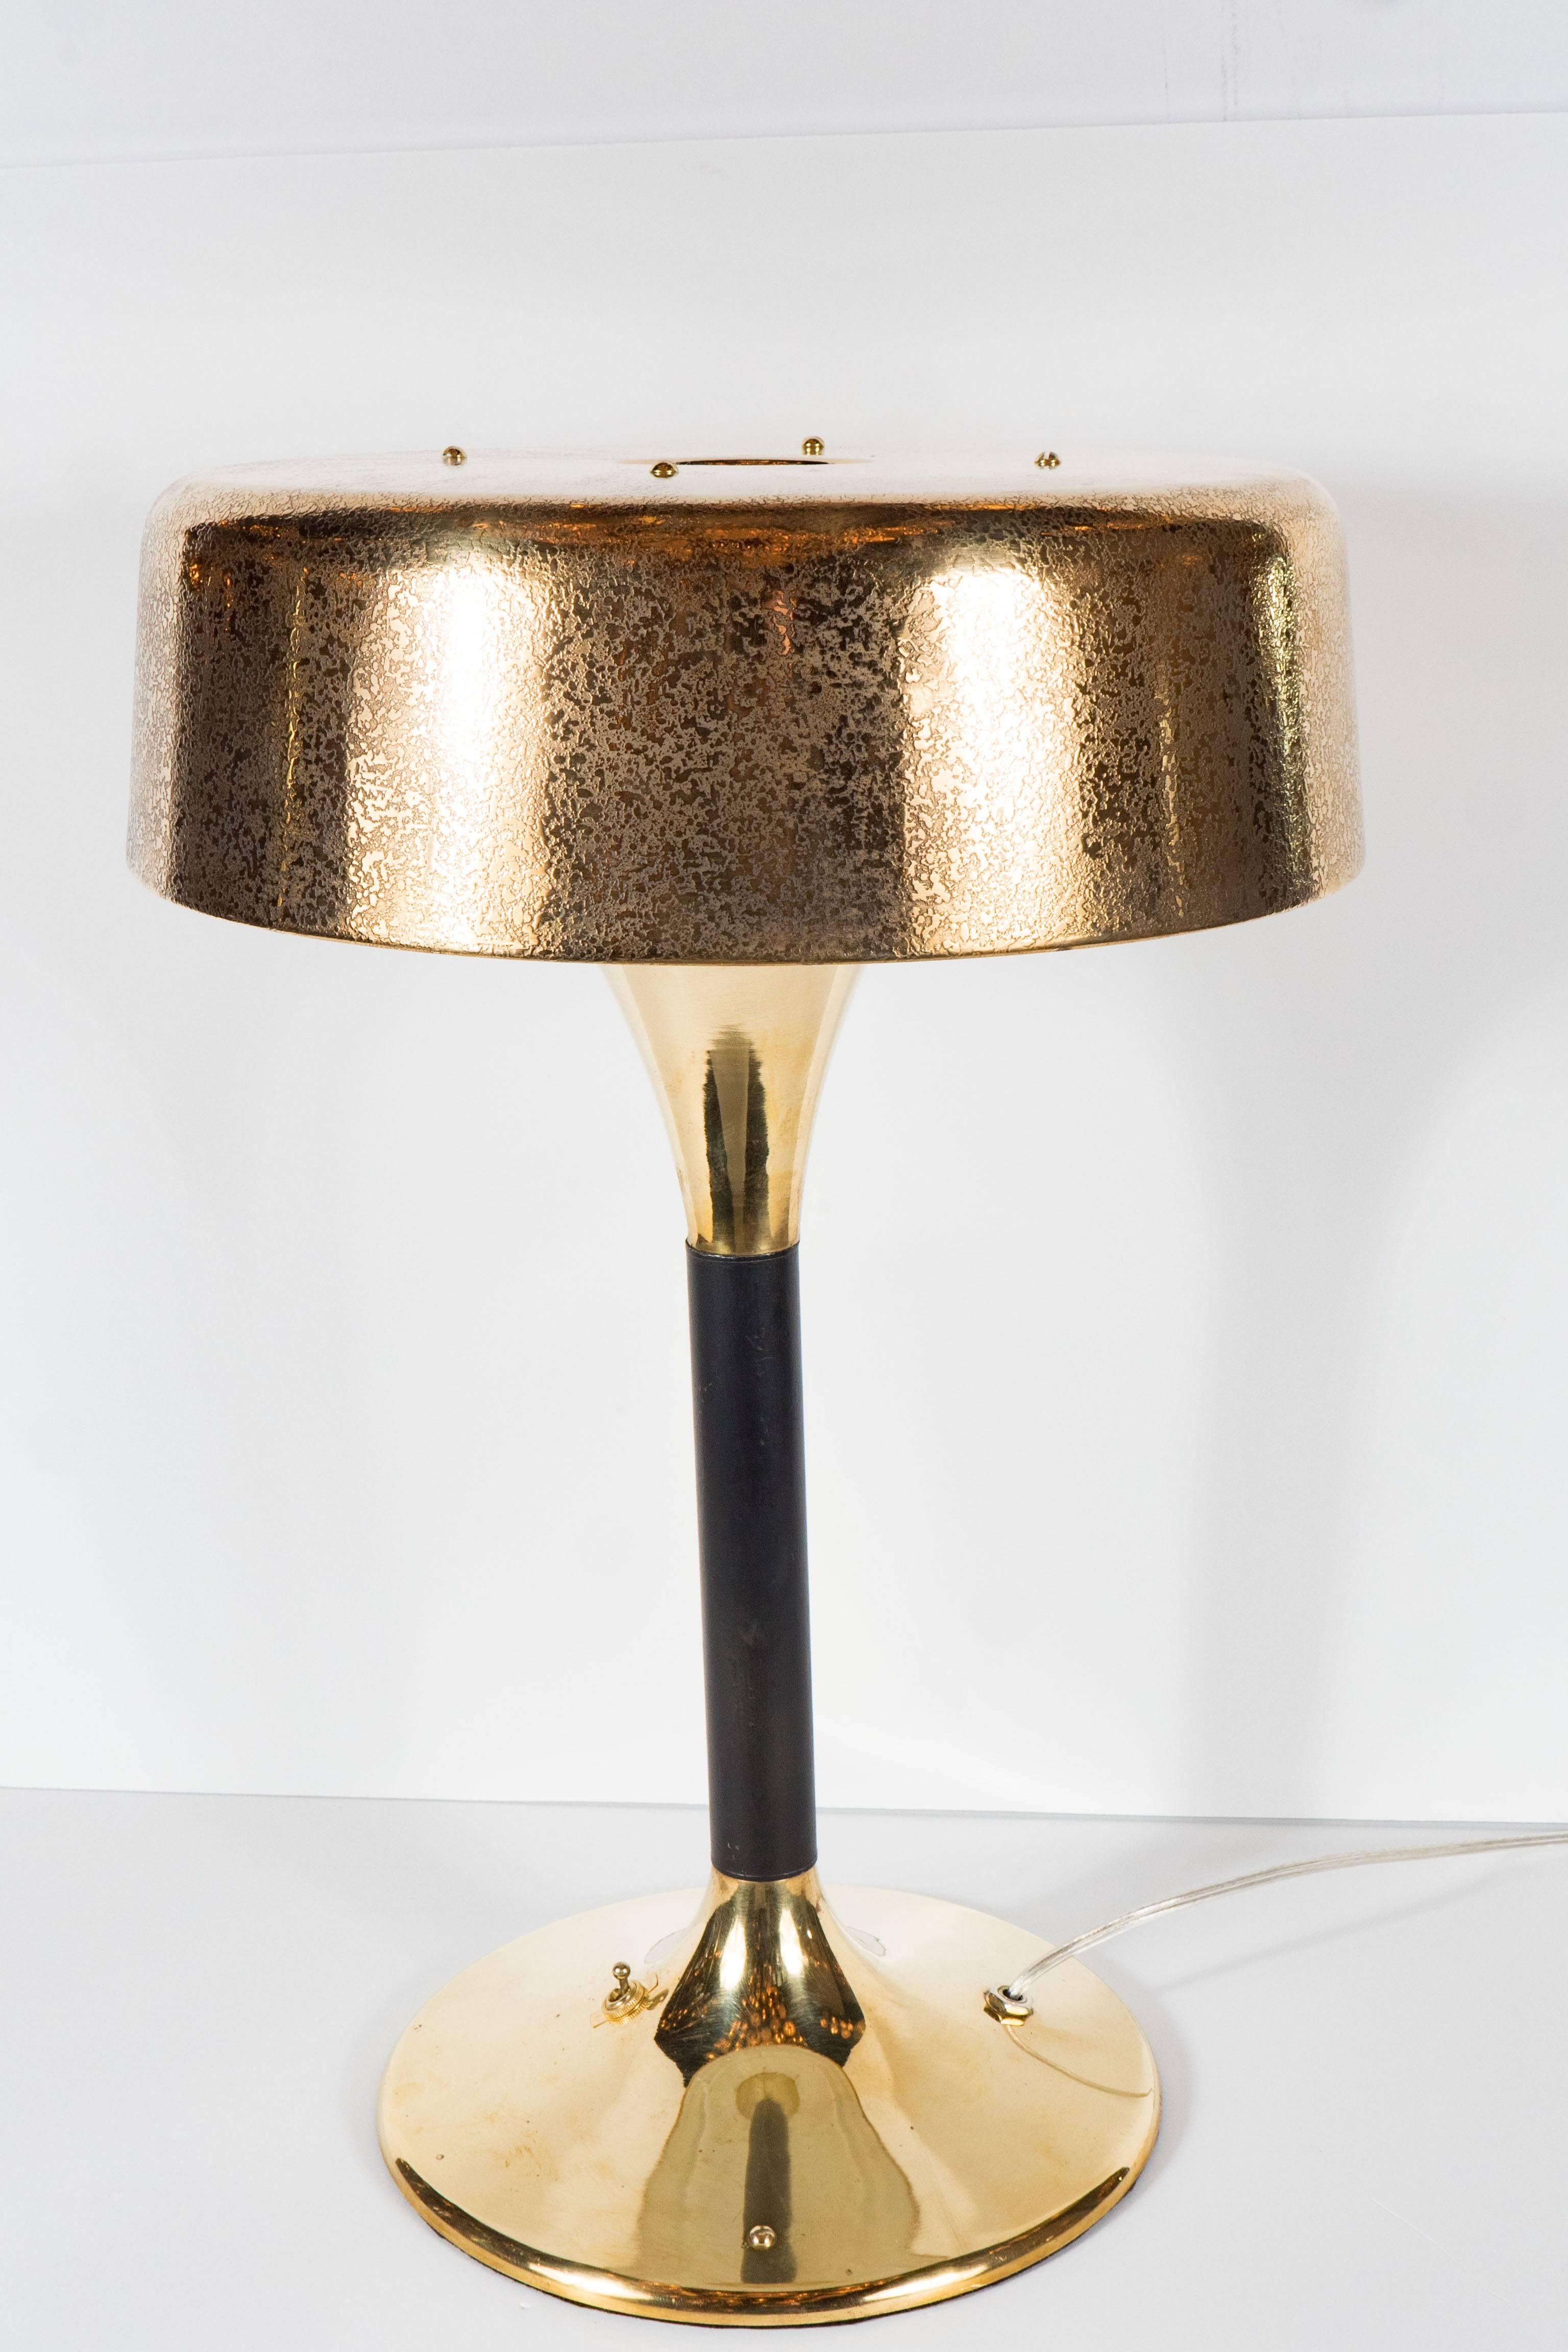 This stunning lamp from an Italian cruise ship features a splayed circular conical base in polished brass that still retains the original switch that reads on and off. It has a black enamel stem and it is fitted with a flared cap that reaches up to